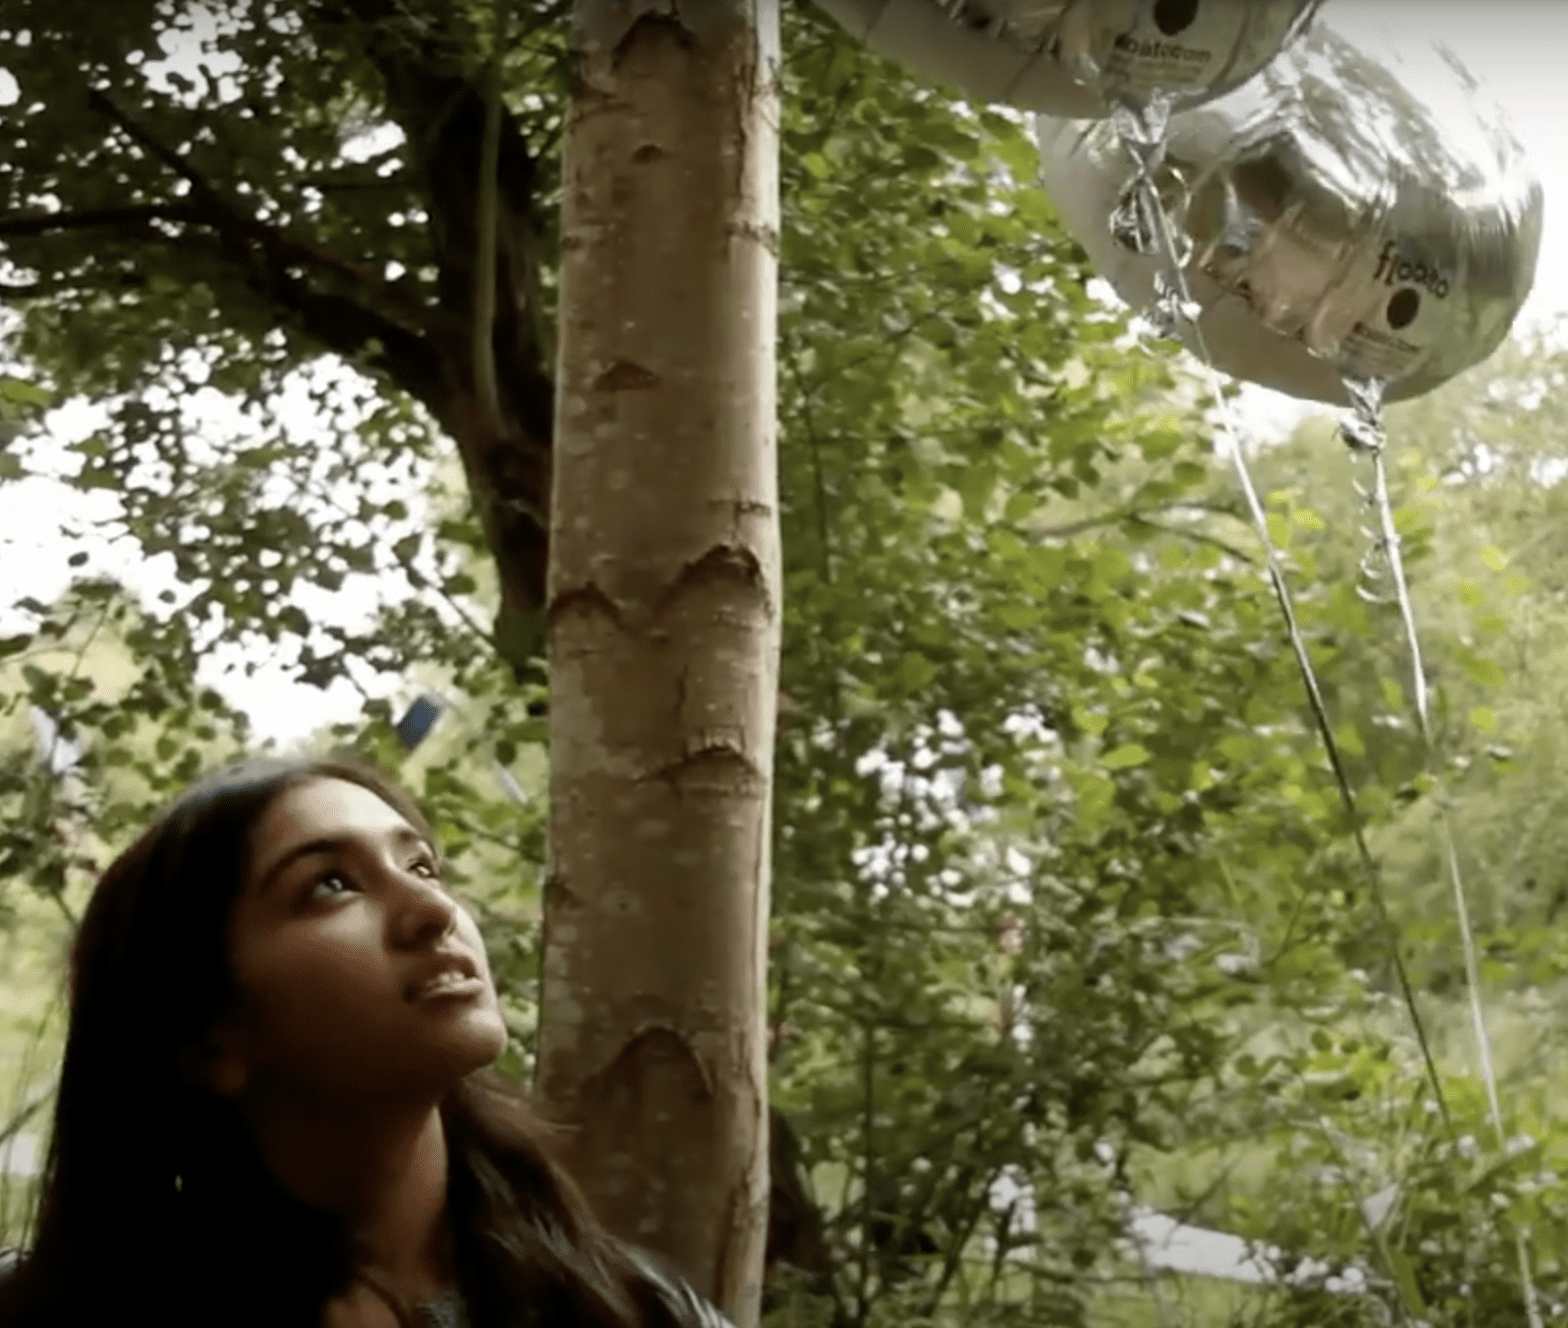 Young woman amongst trees looking up two silver balloons.